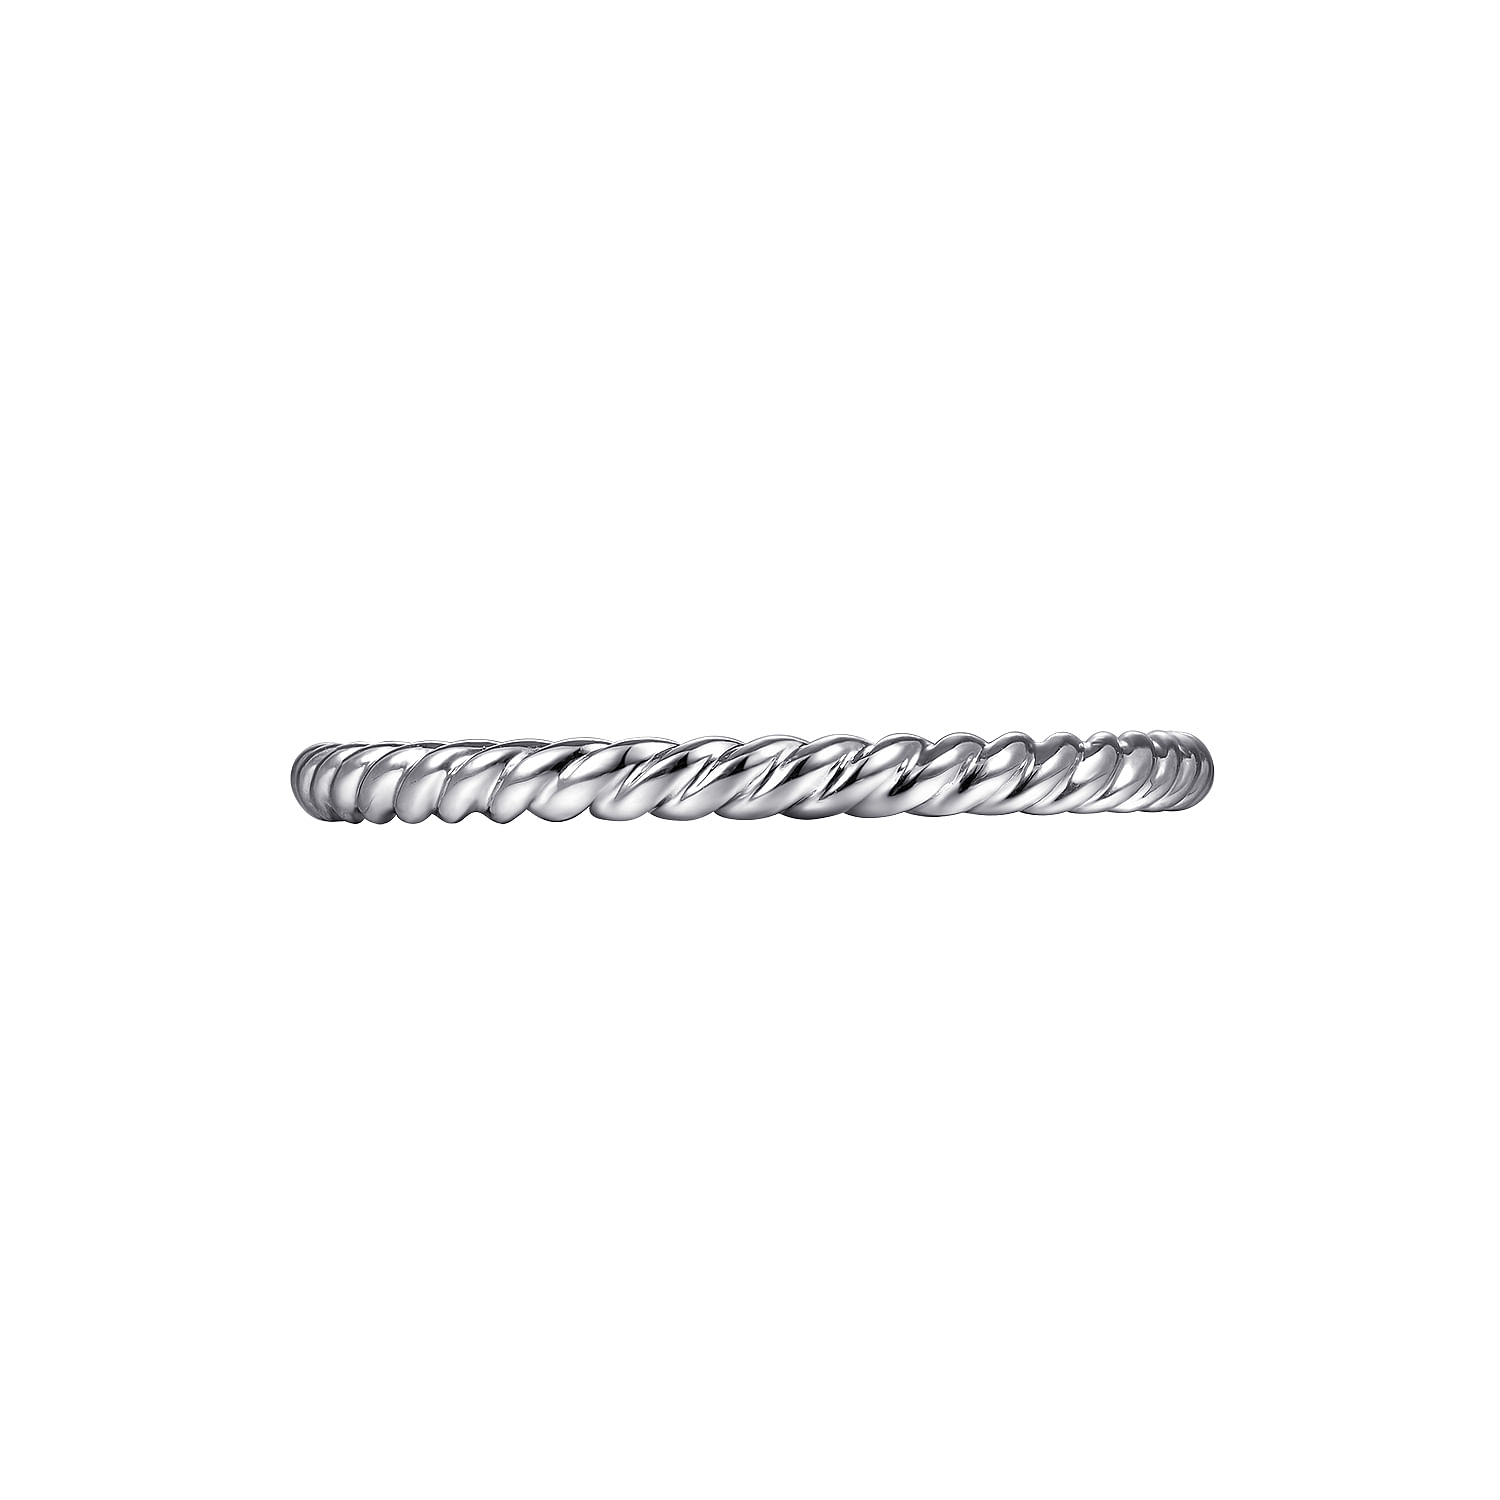 14K White Gold Twisted Rope Stackable Wedding Band